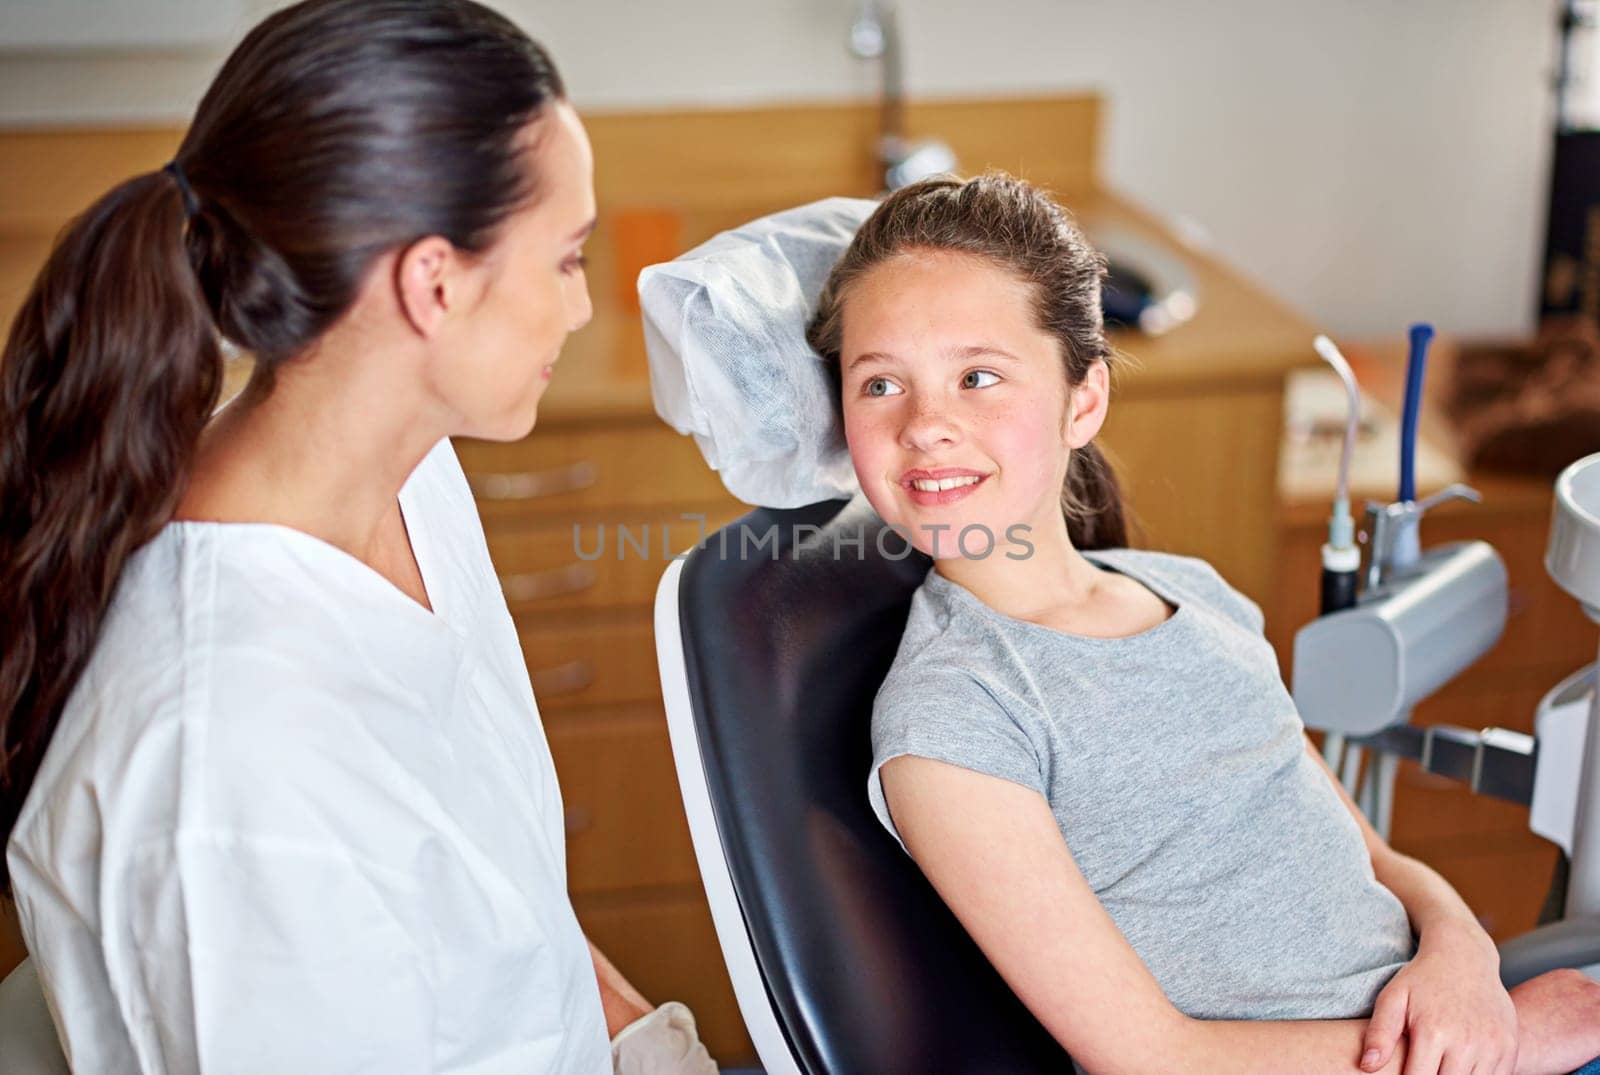 Dentist, child and oral hygiene consultation with conversation and talk for dental care. Clinic, smile and young girl with healthcare and wellness advice for mouth and teeth health at appointment by YuriArcurs